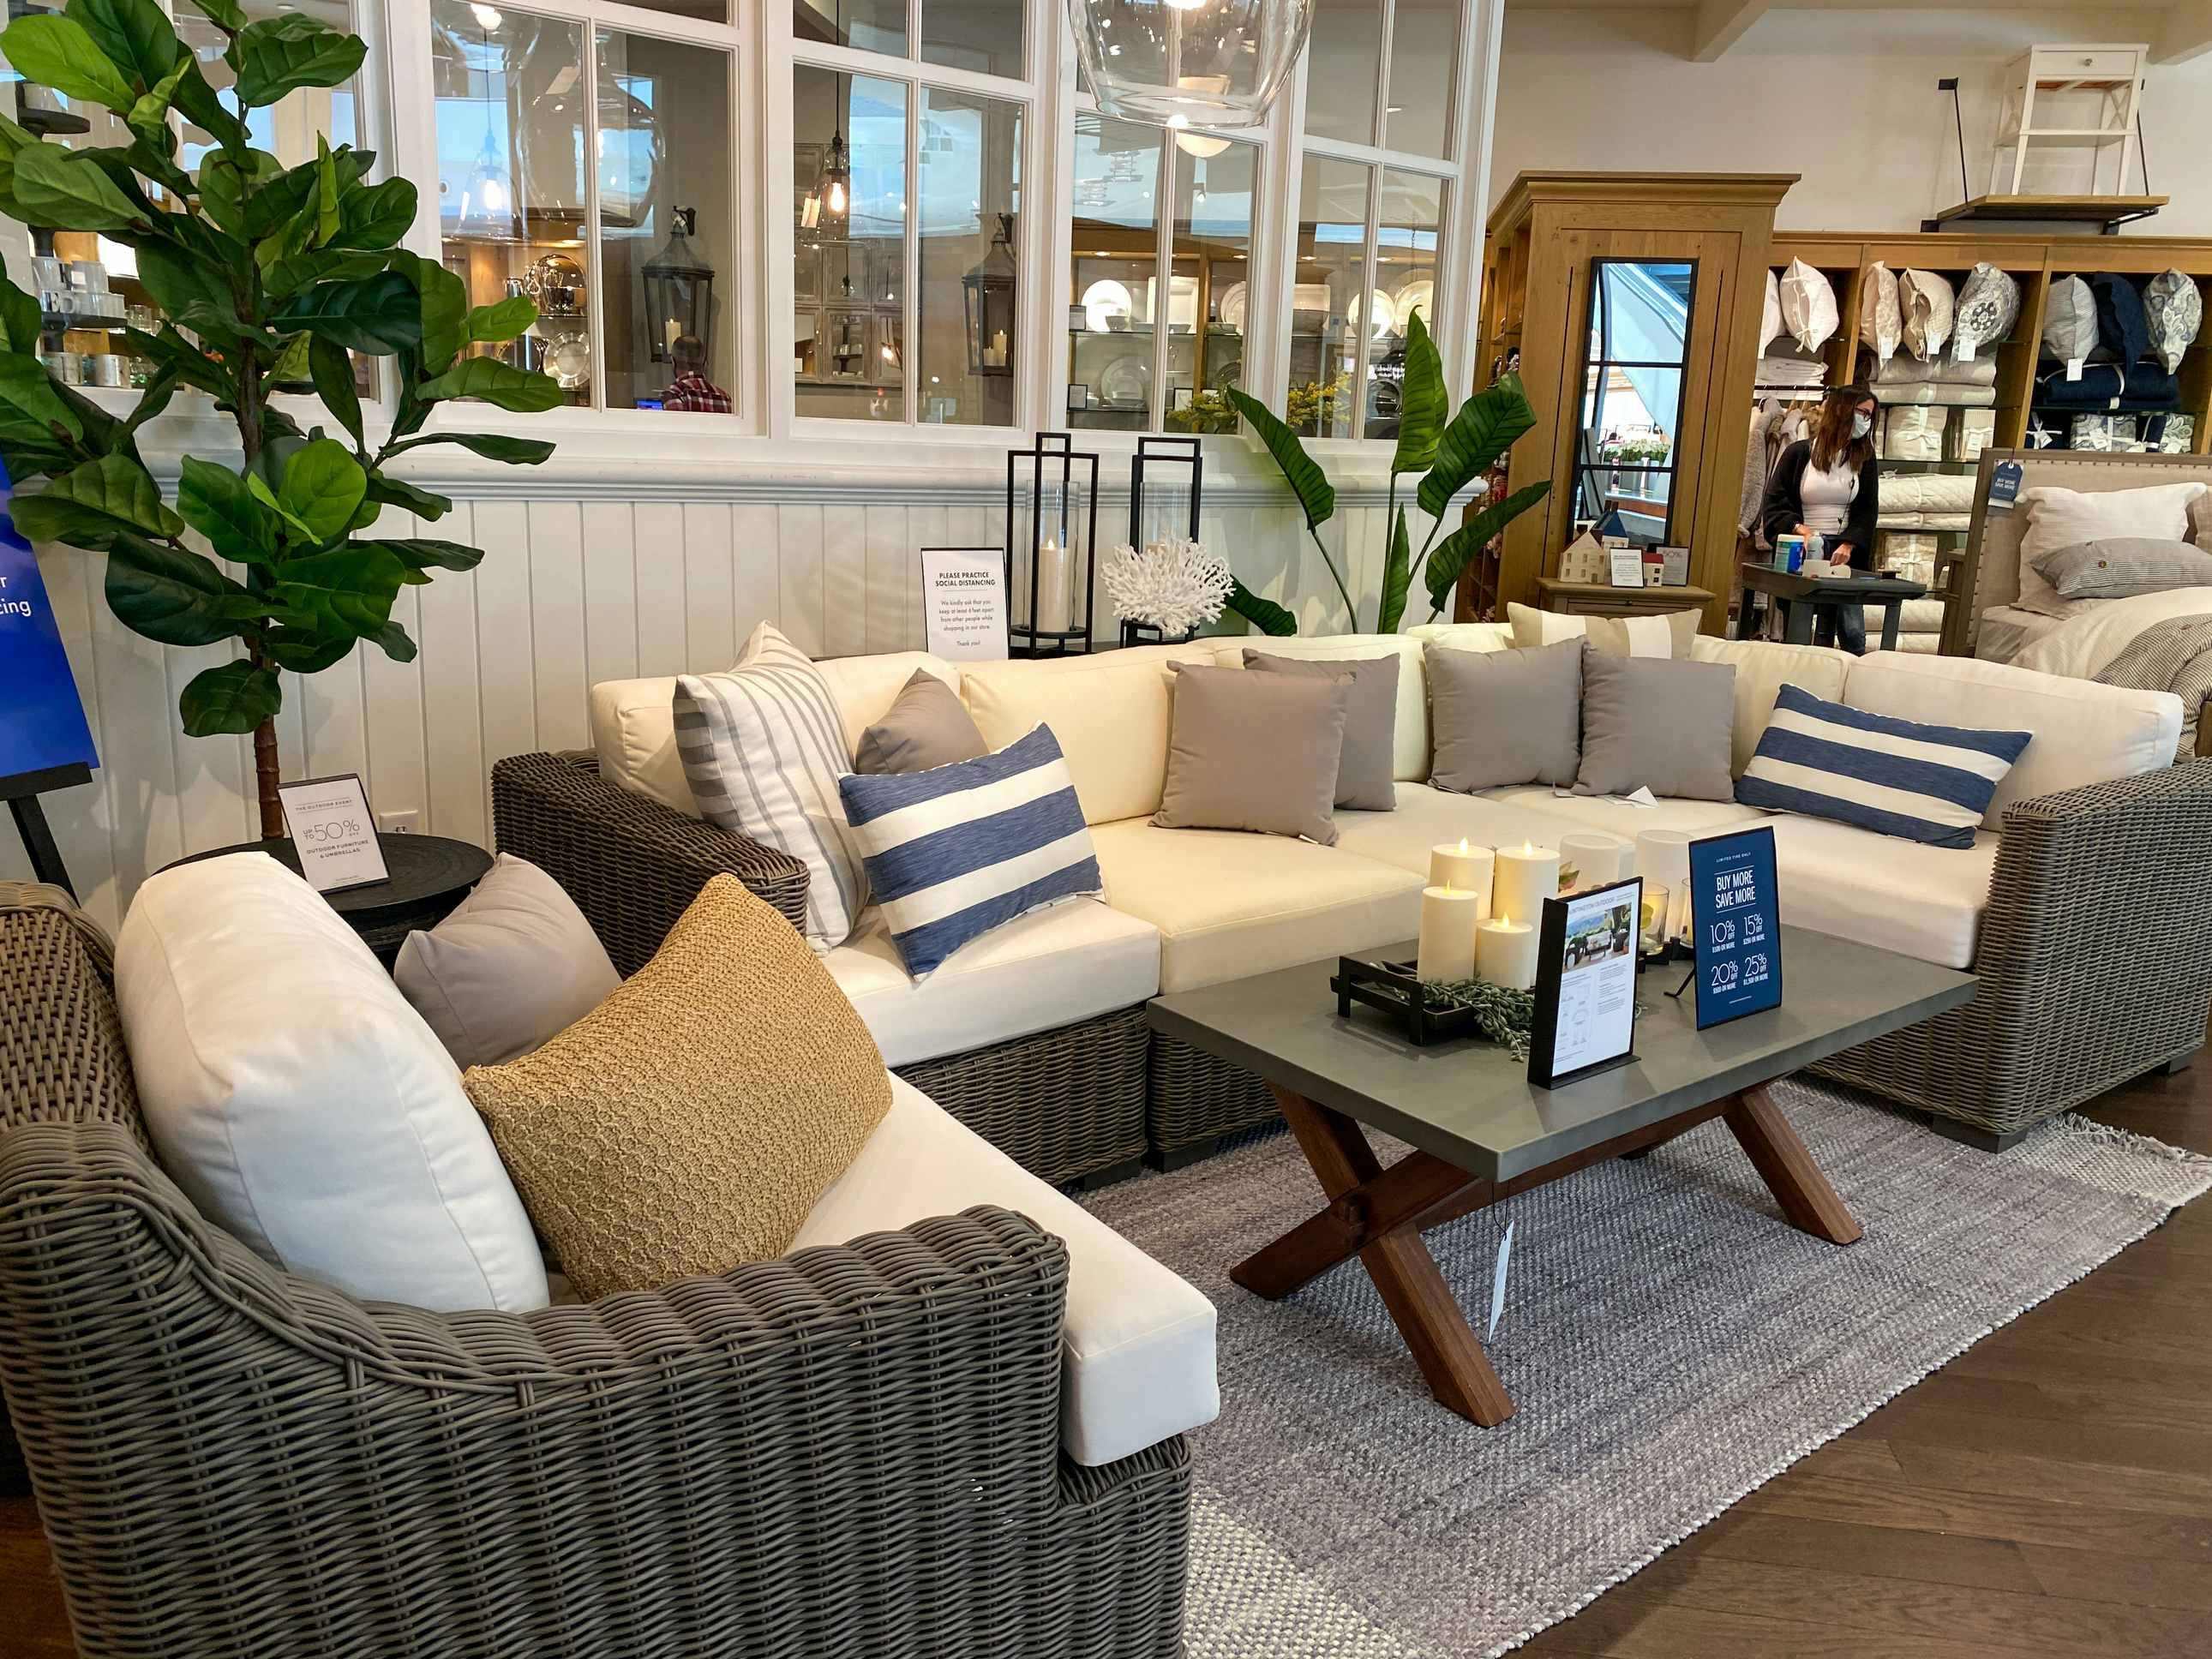 20 Stores Like Pottery Barn in 2023 - PureWow